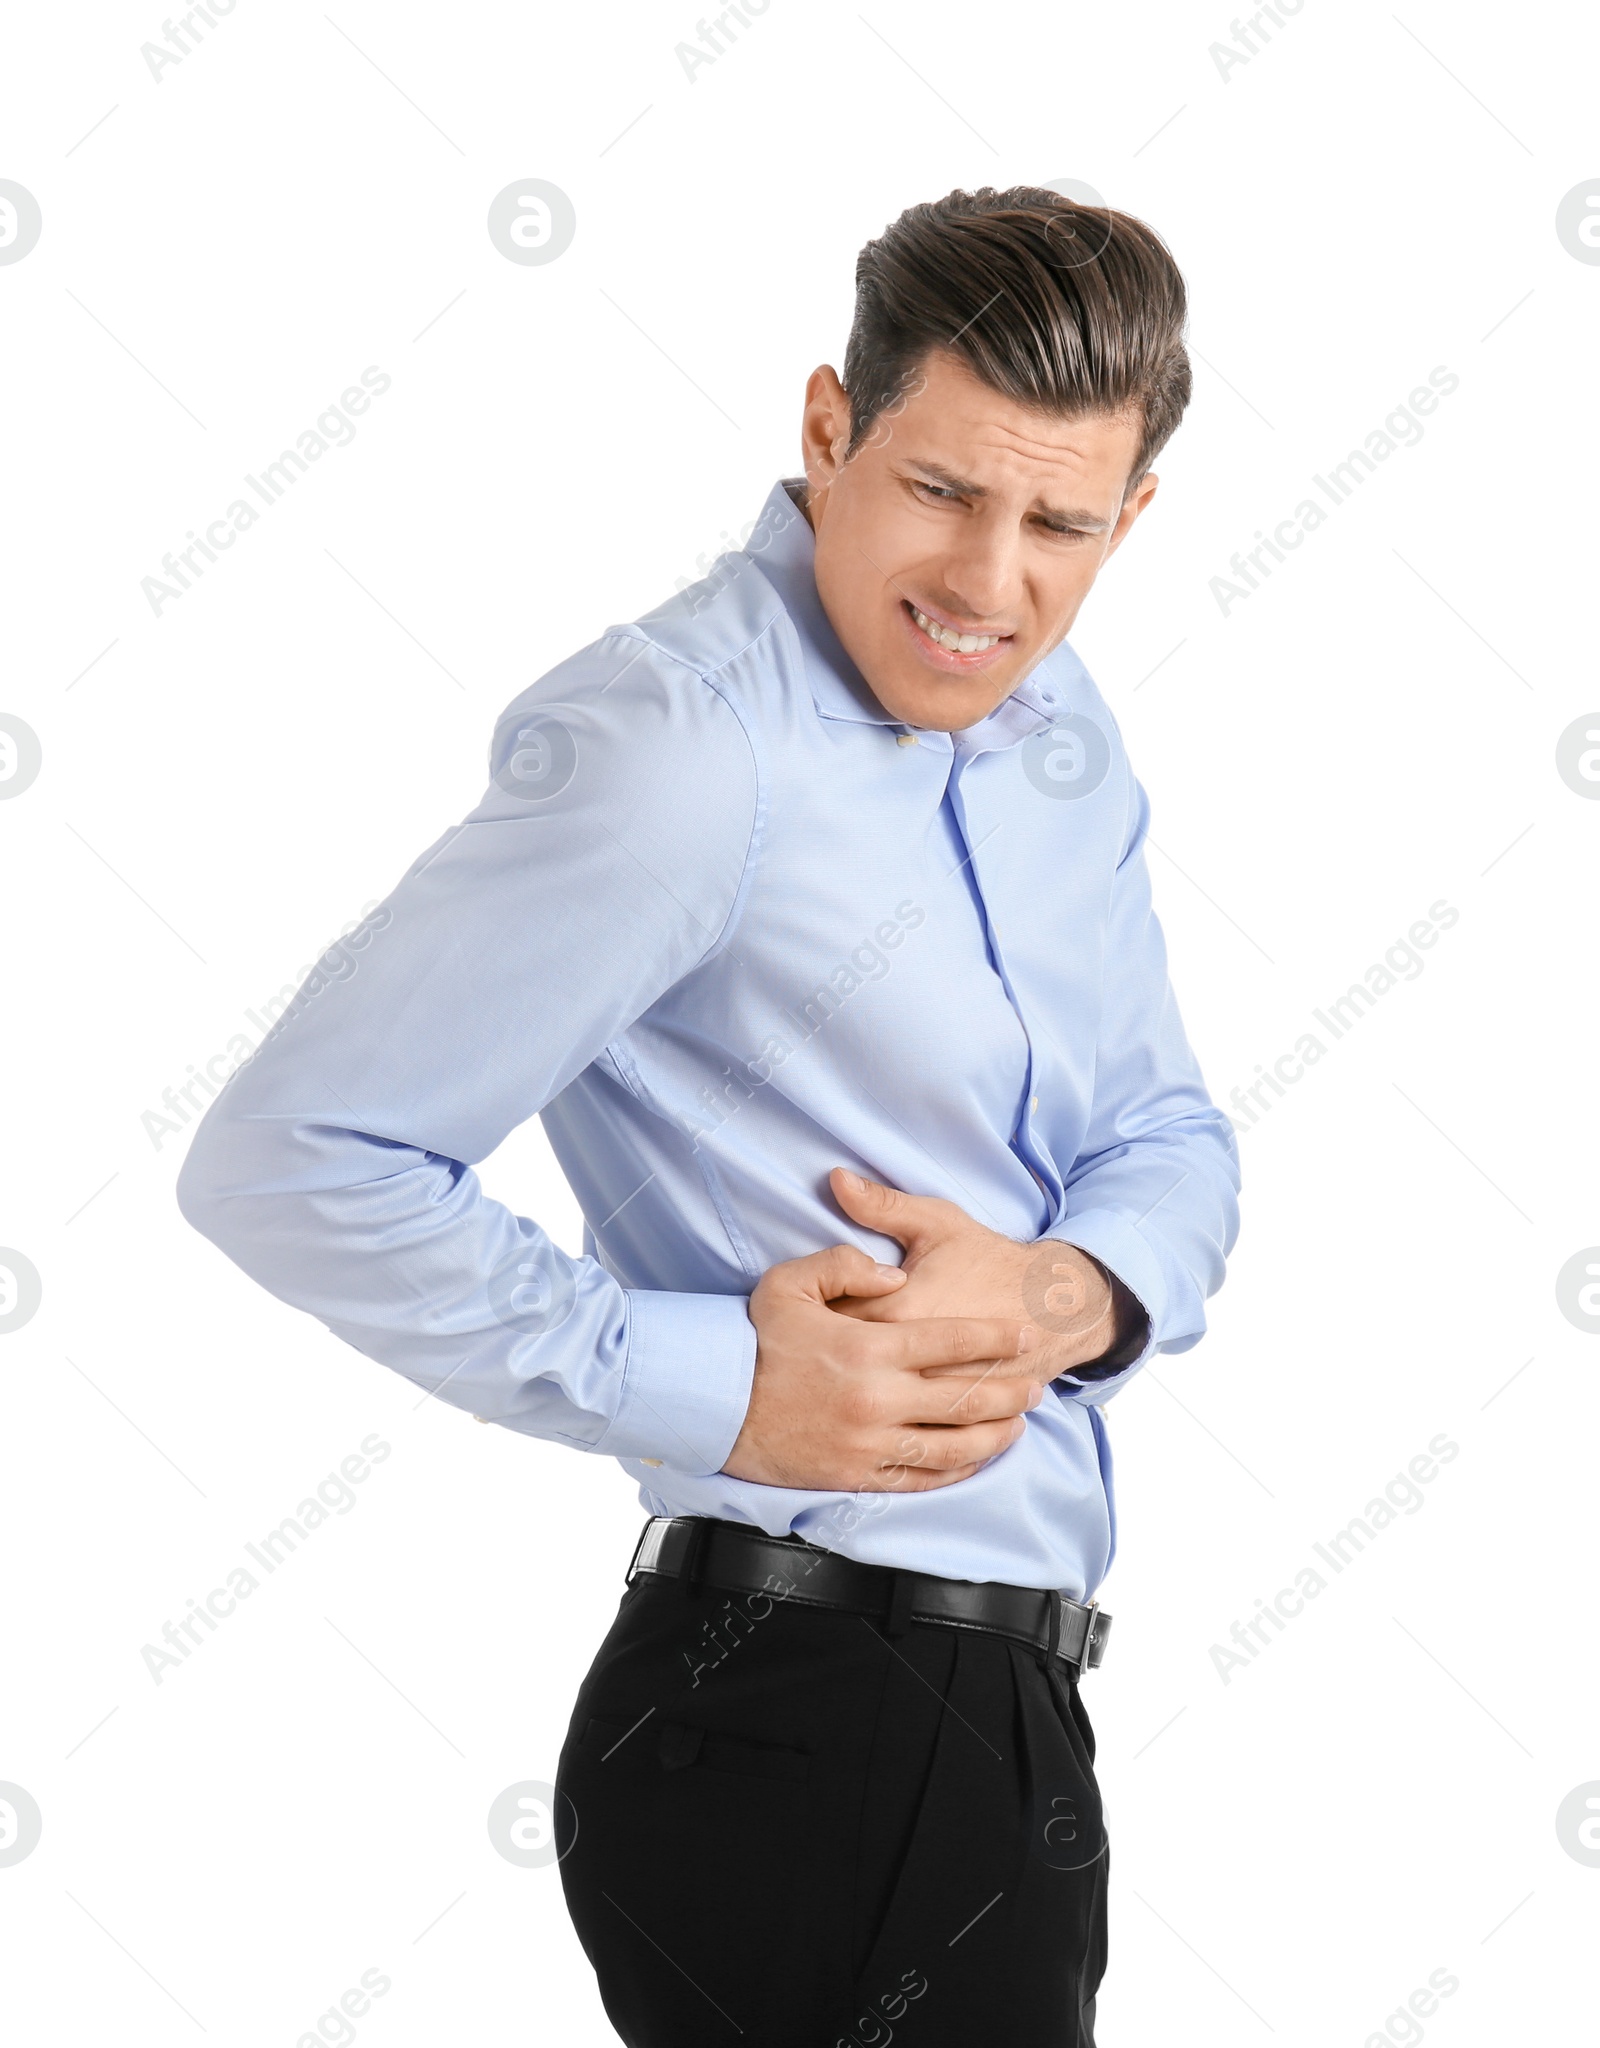 Photo of Man suffering from flank pain on white background